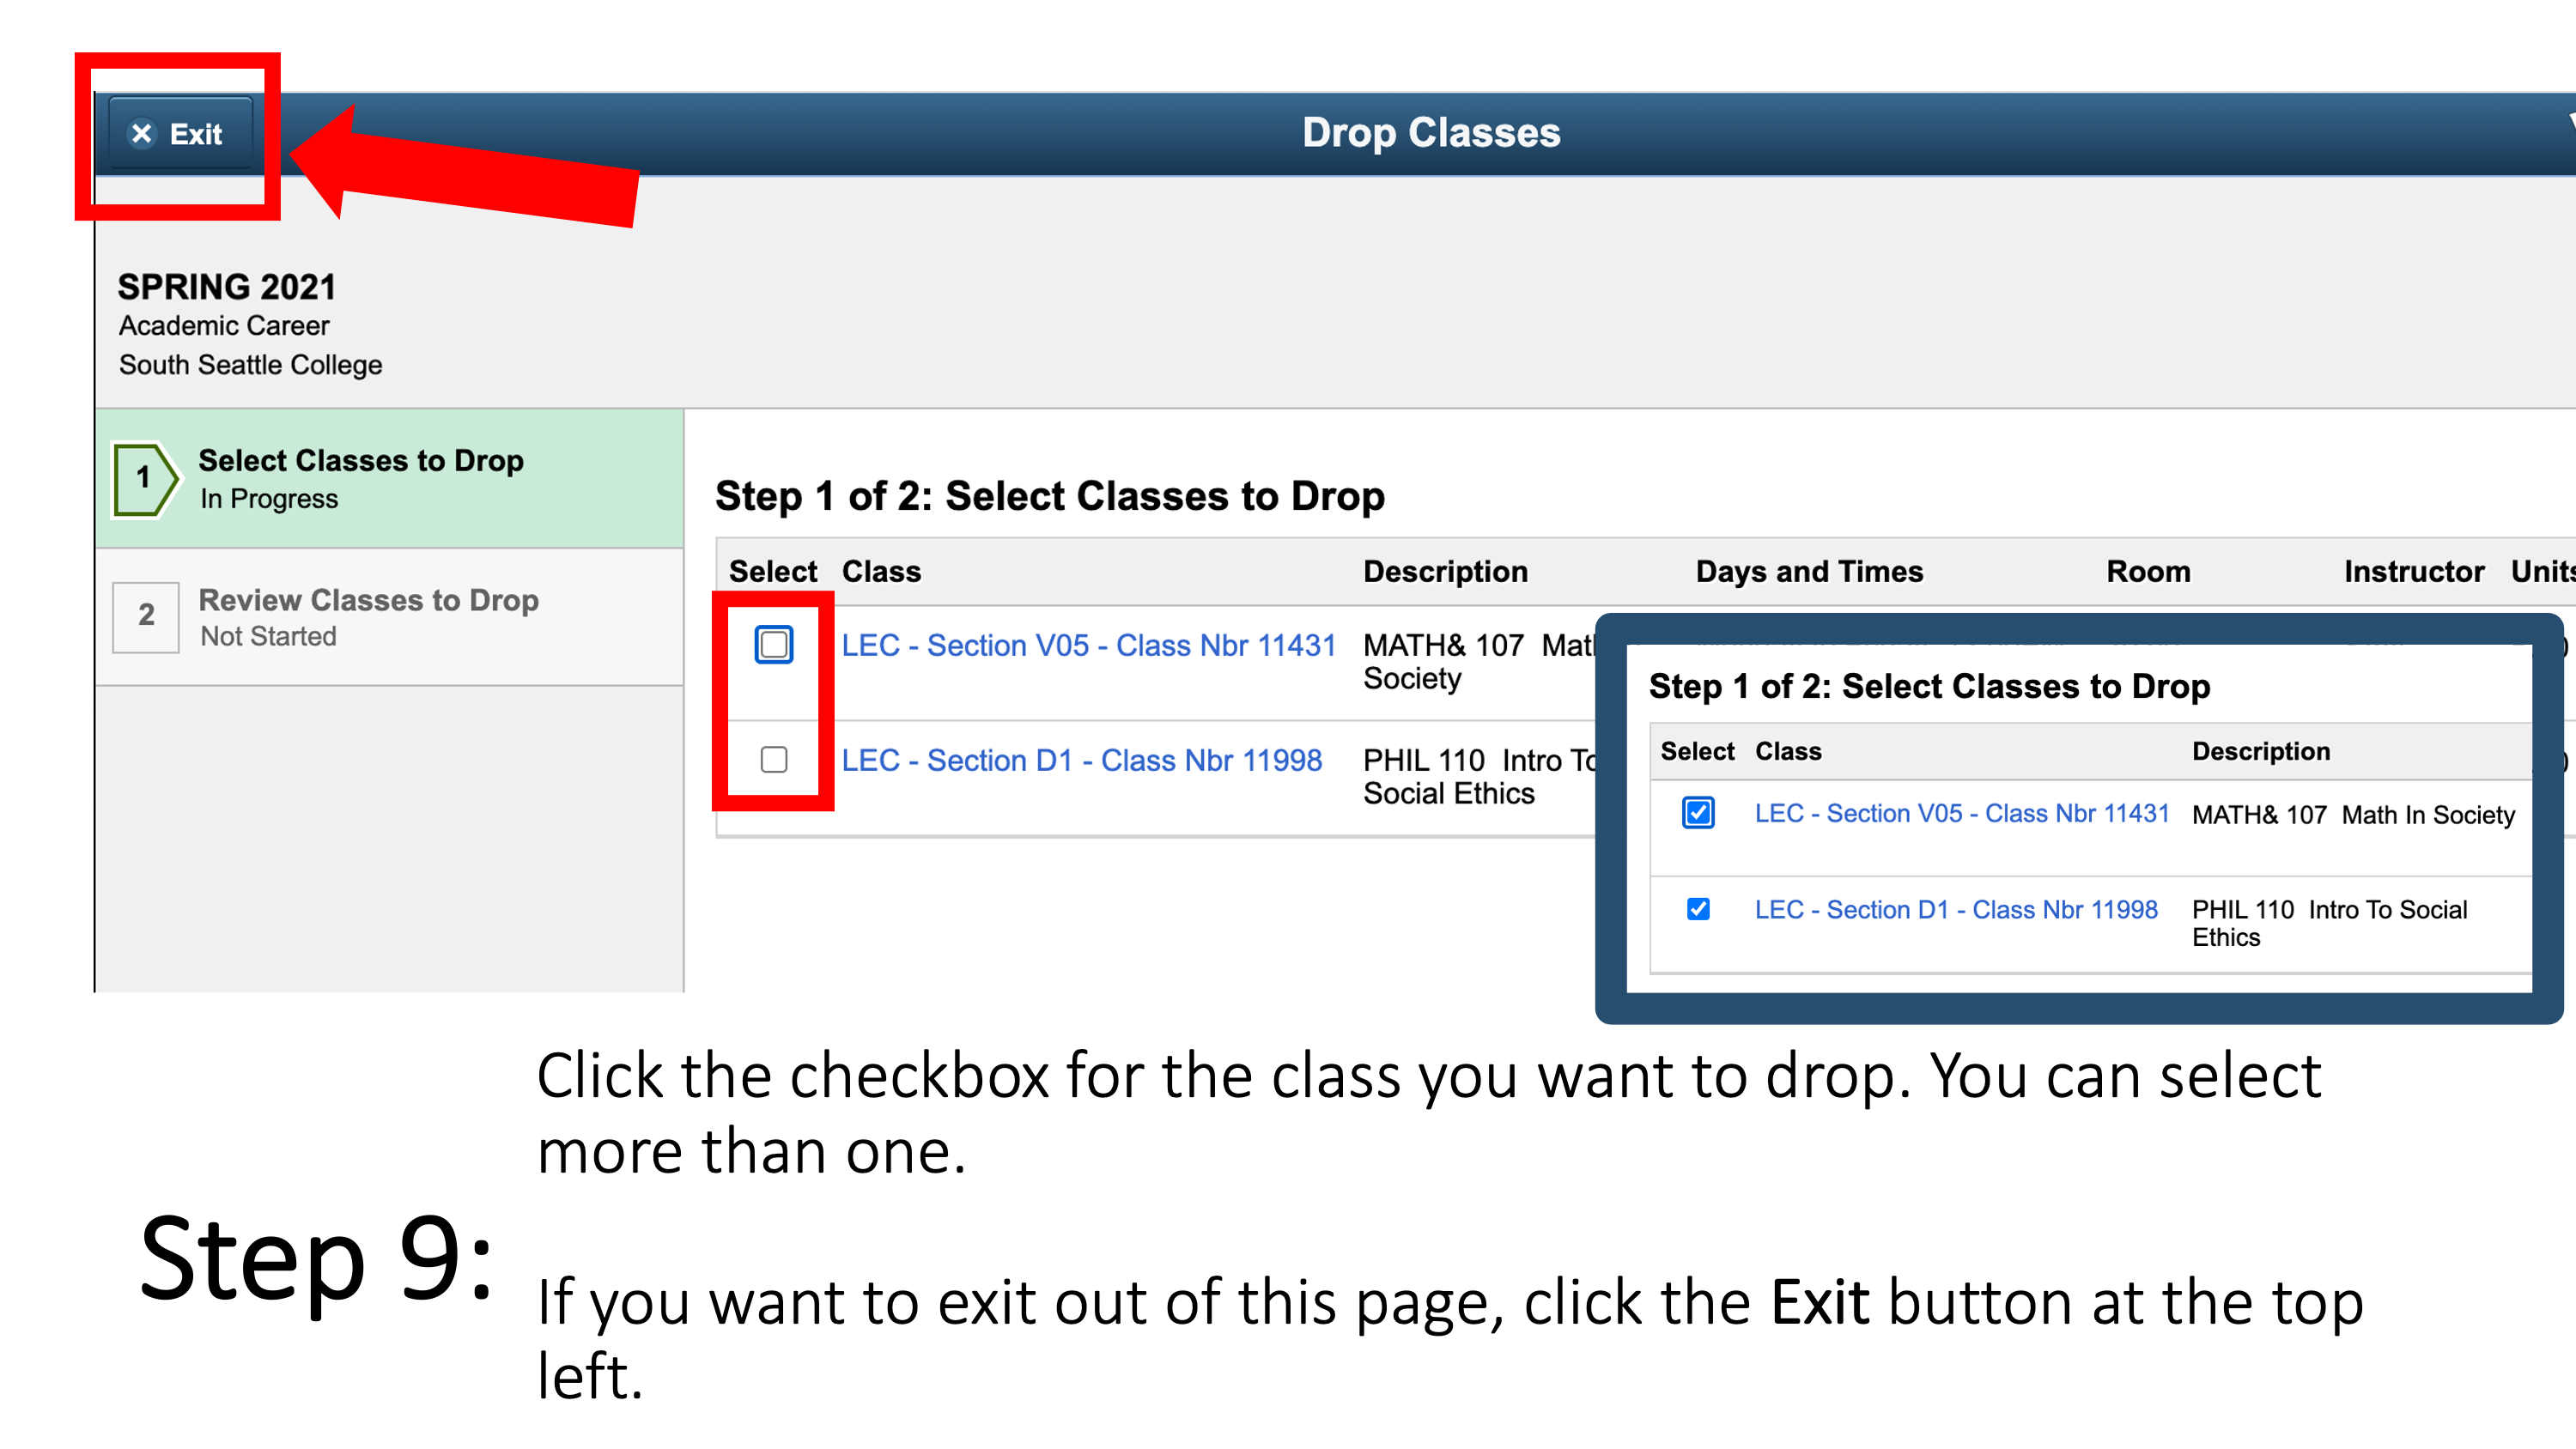 Click the checkbox for the class you want to drop. You can select more than one. If you want to exit out of this page, click the Exit button at the top left.